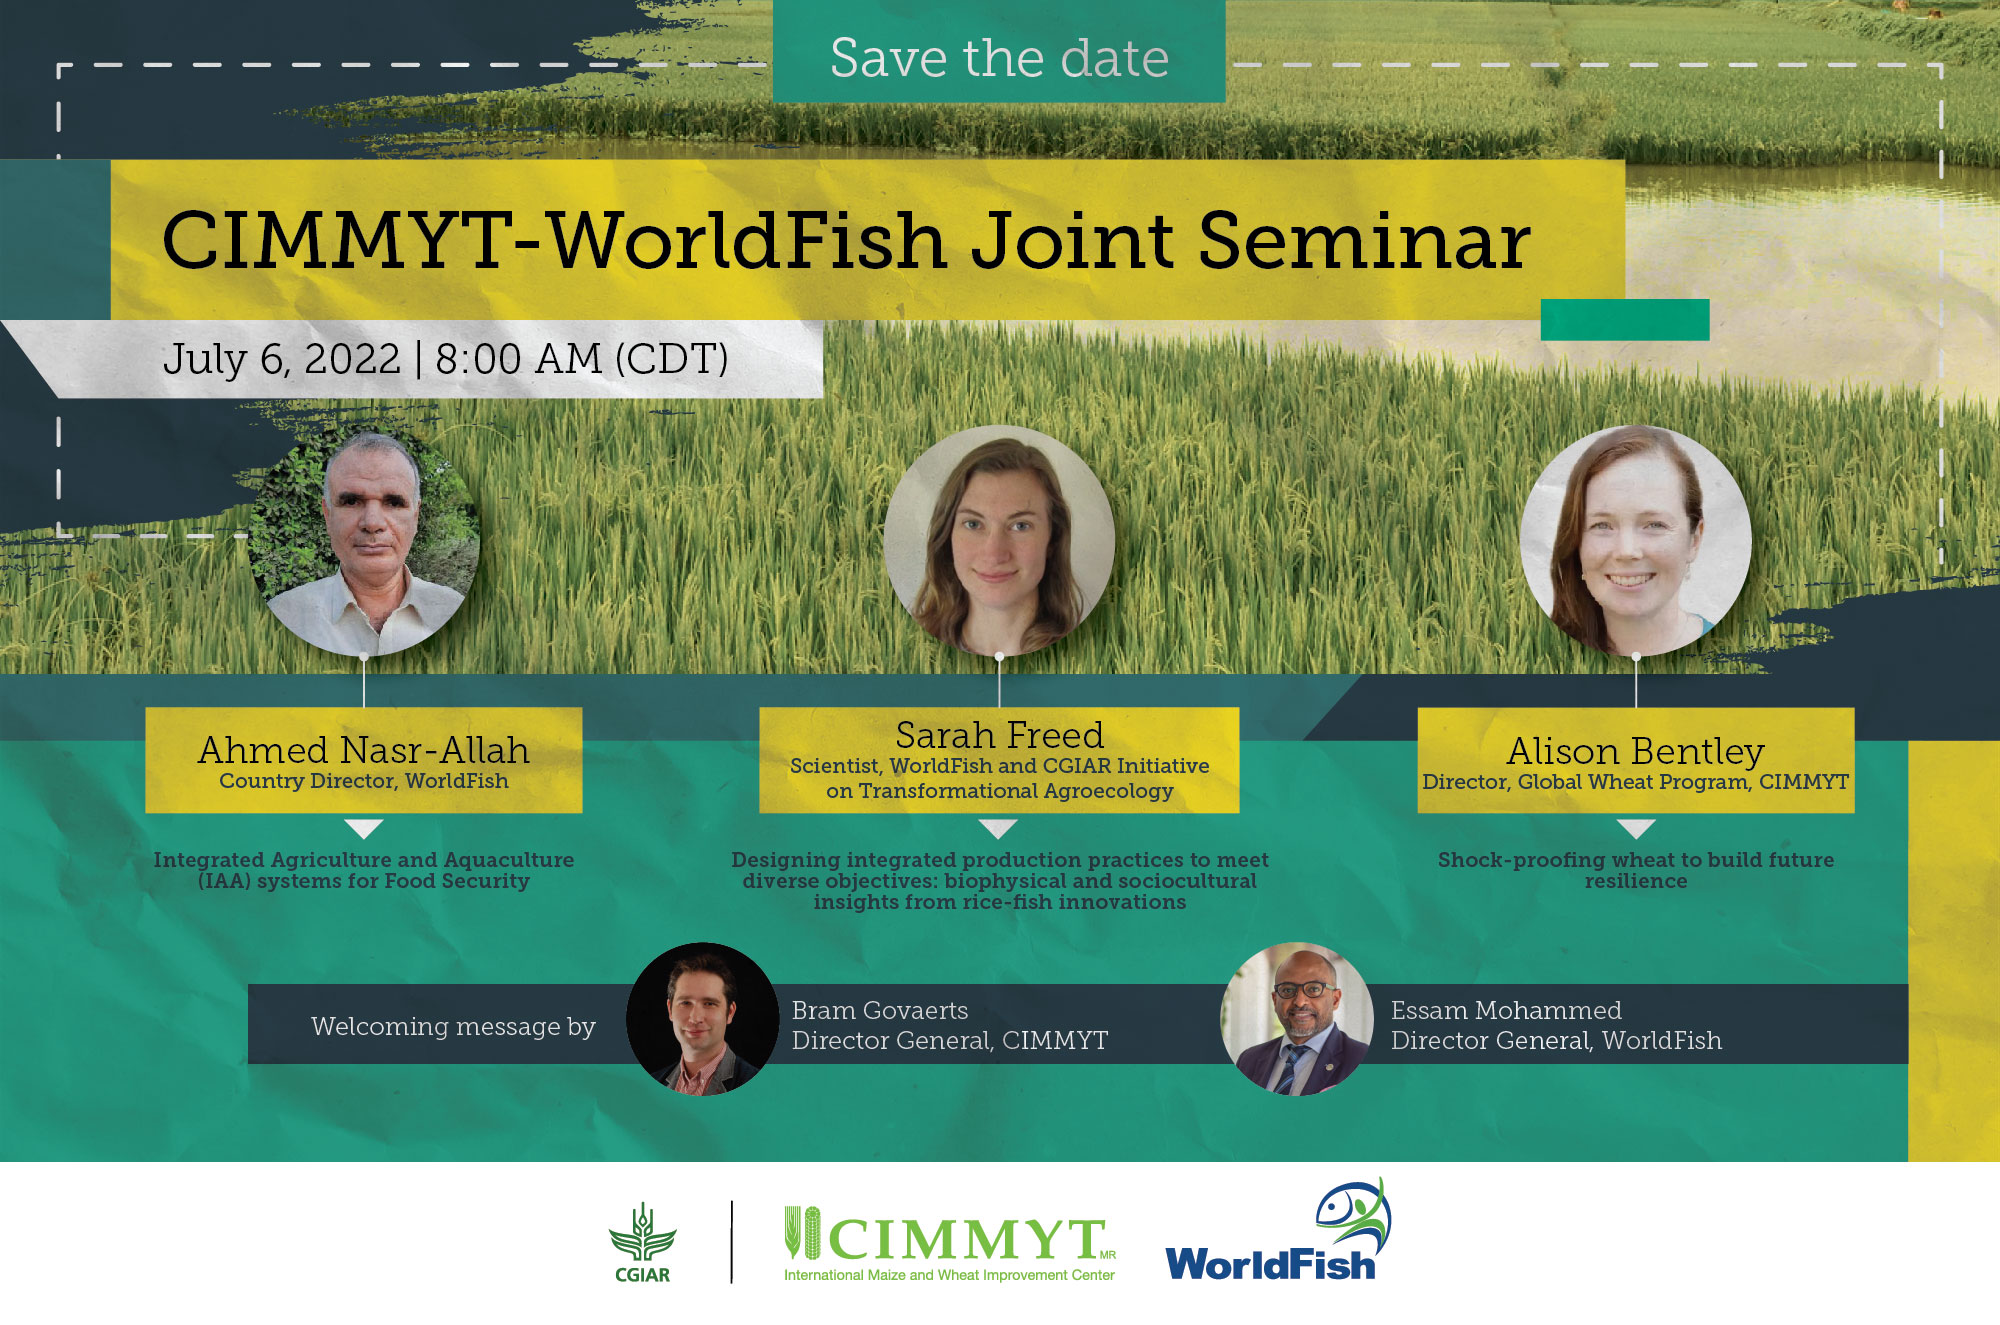 CIMMYT-WorldFish Joint Seminar: Integrated agriculture and aquaculture (IAA) systems for food security